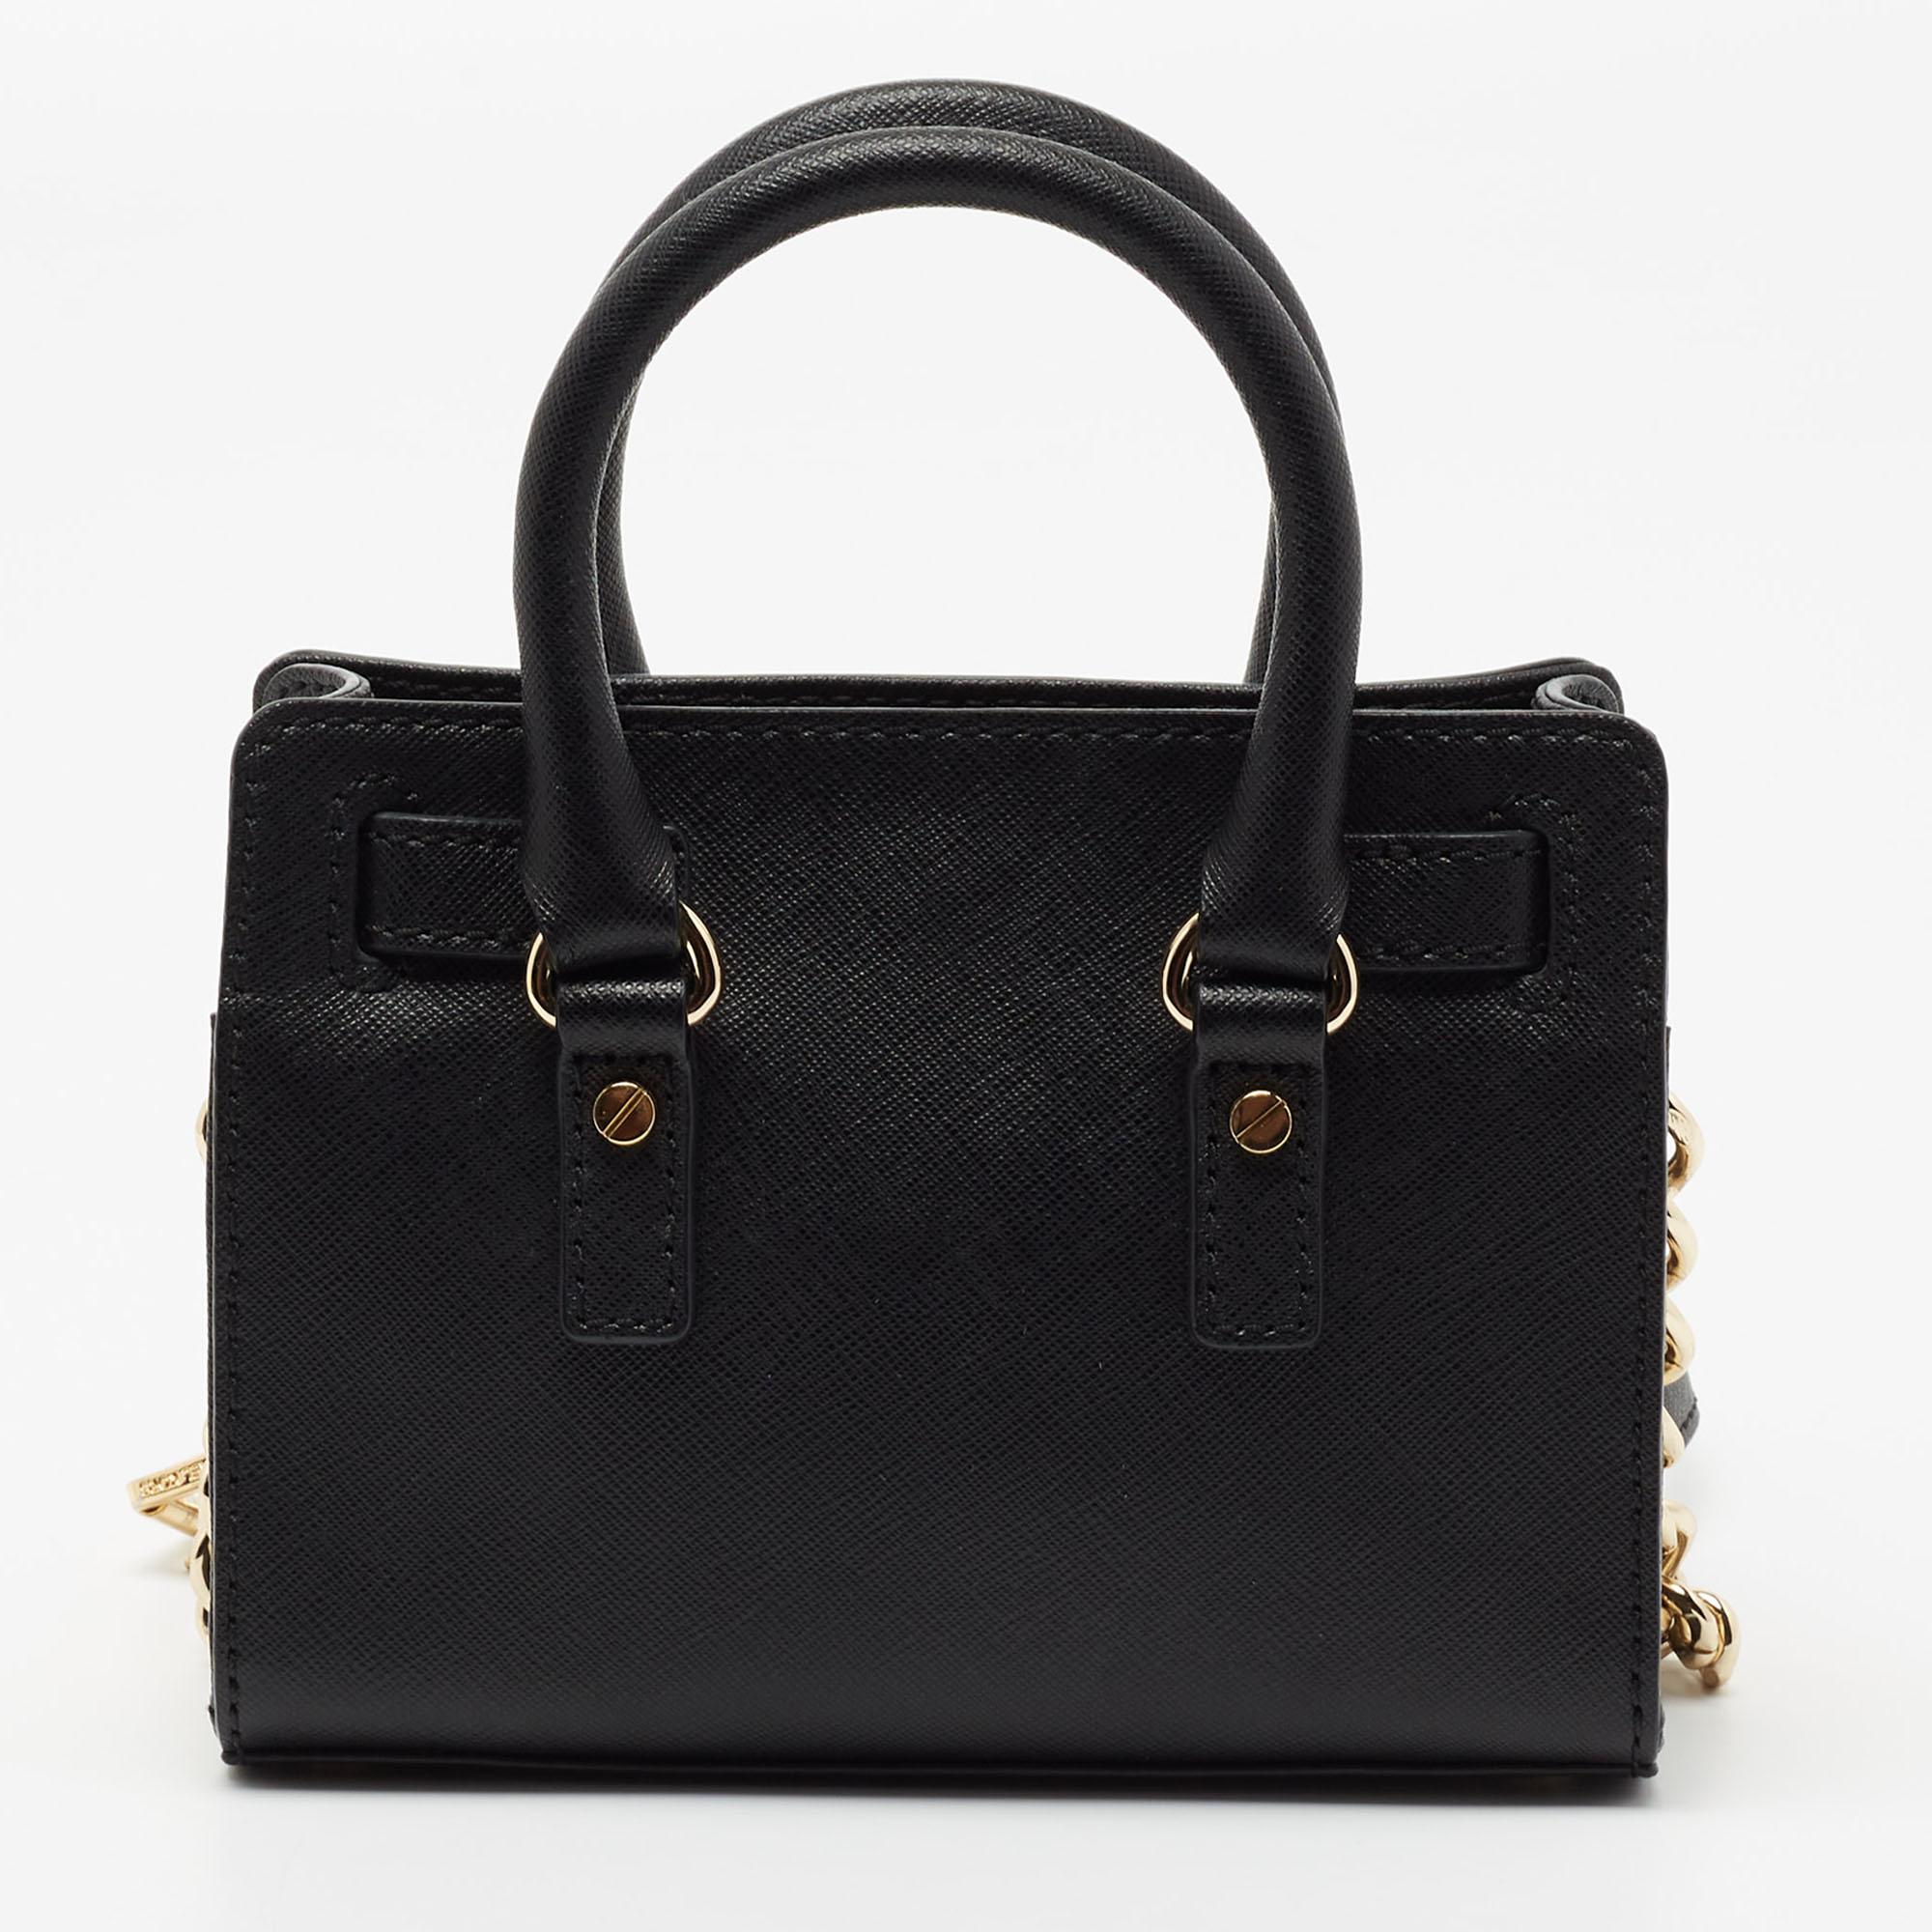 The dual handles and the shoulder strap makes this MICHAEL Michael Kors Hamilton bag a practical styling choice. Constructed from leather, the gold-tone accents makes it undeniably chic, and it features a branded lock closure on the front. The